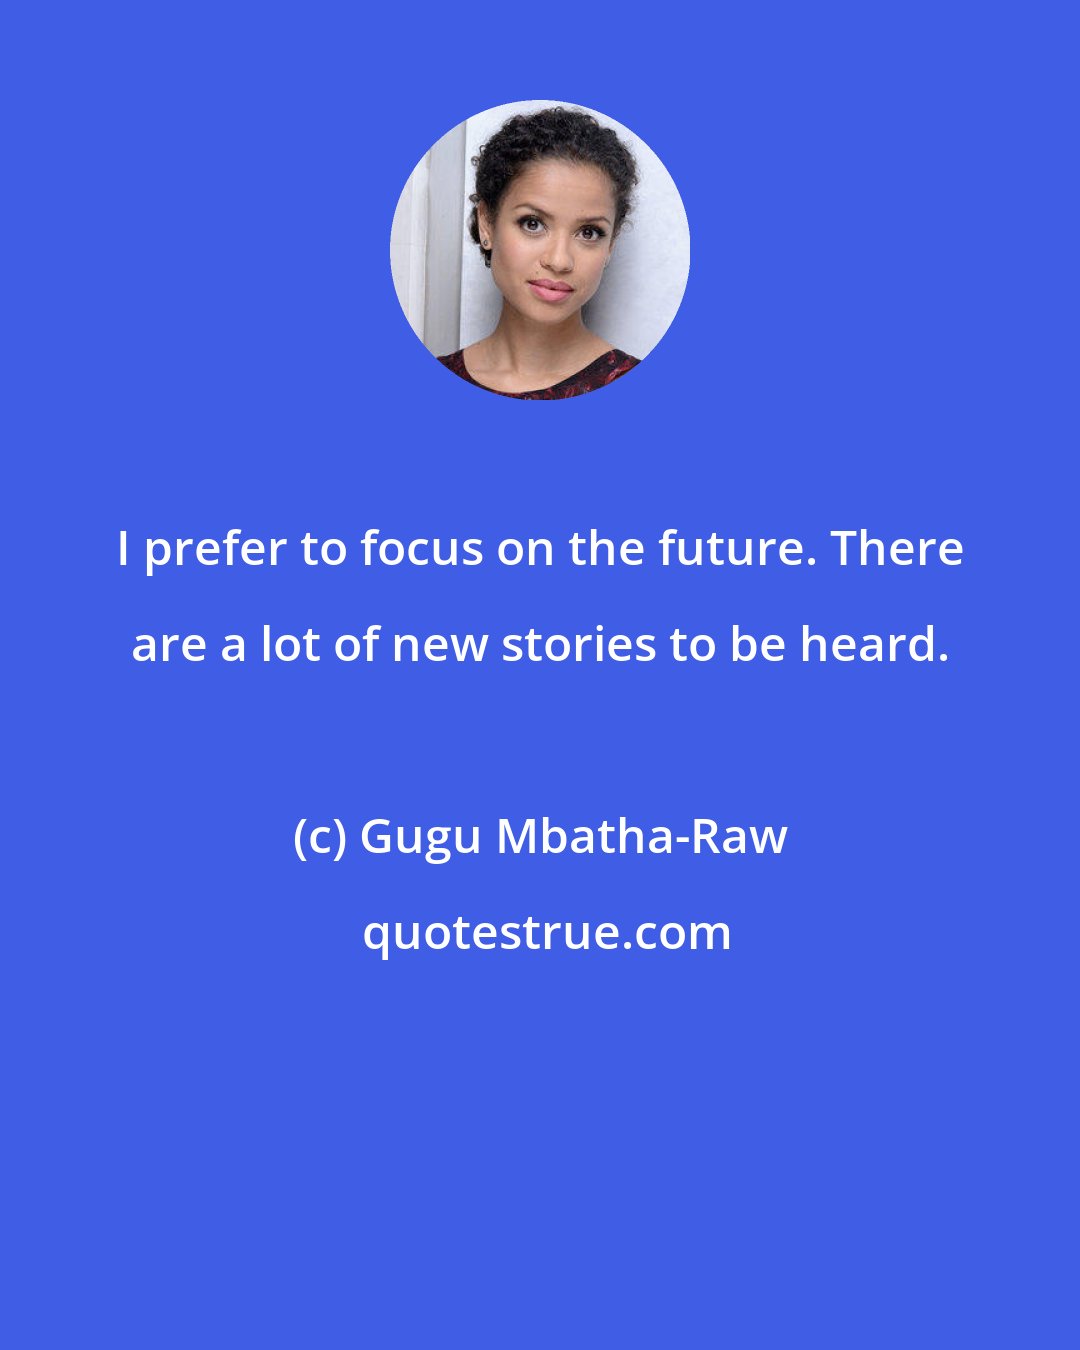 Gugu Mbatha-Raw: I prefer to focus on the future. There are a lot of new stories to be heard.